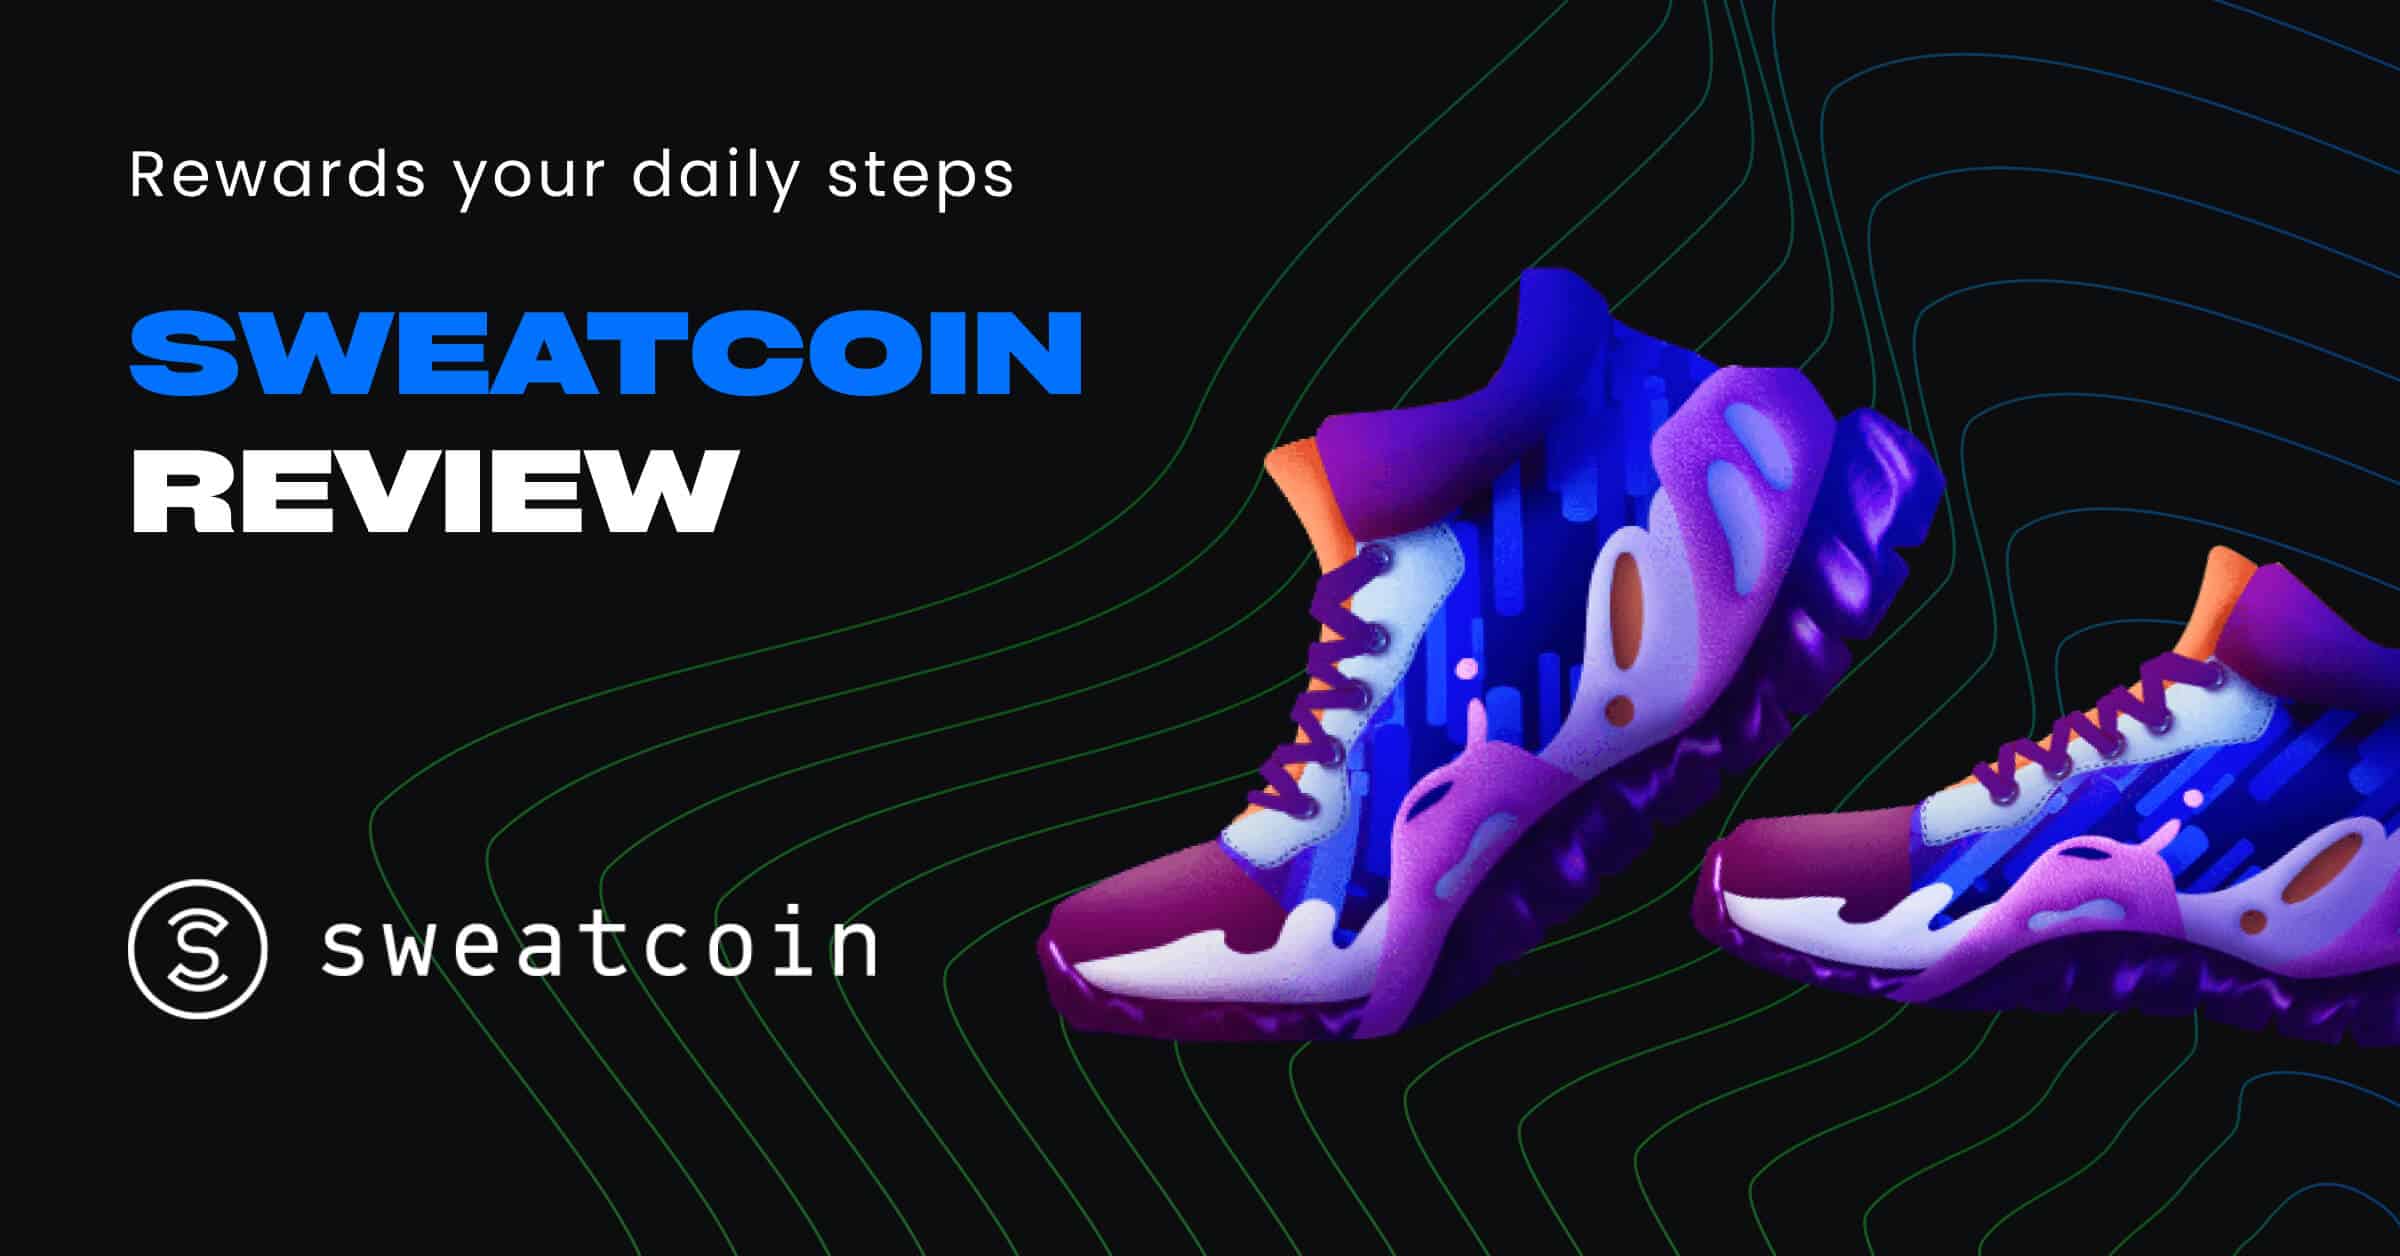 sweatcoin review image 1